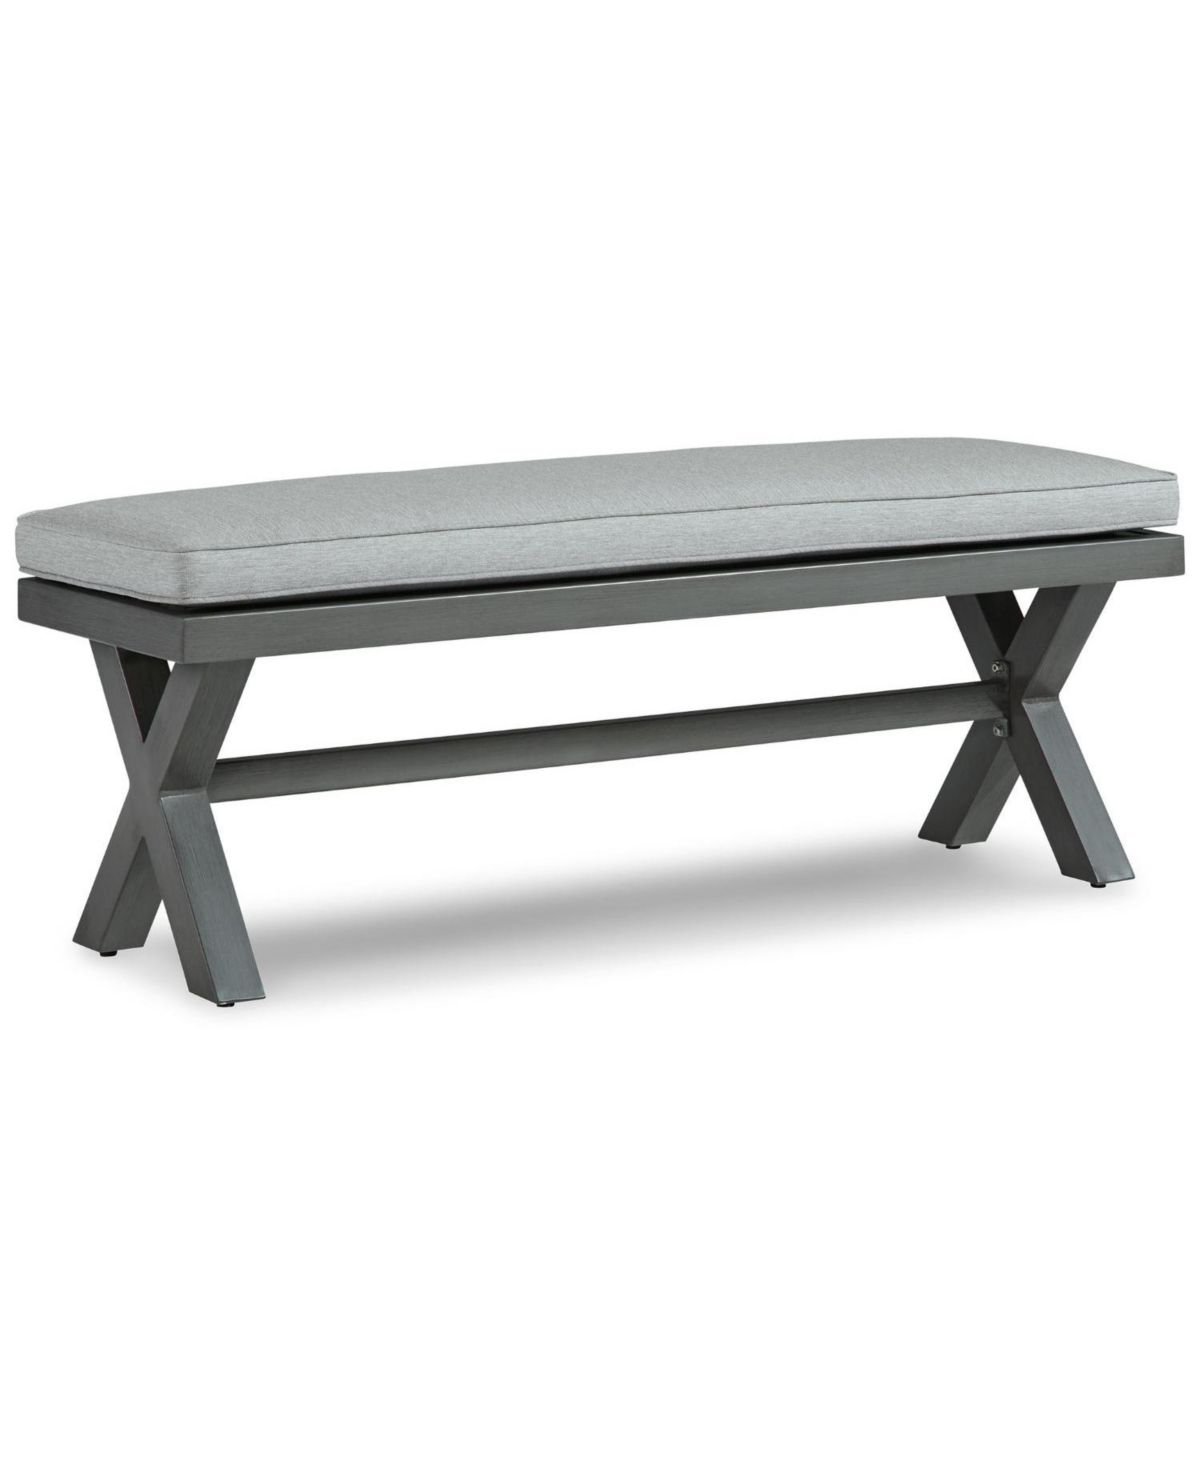 Signature Design By Ashley Elite Park Bench With Cushion In Gray